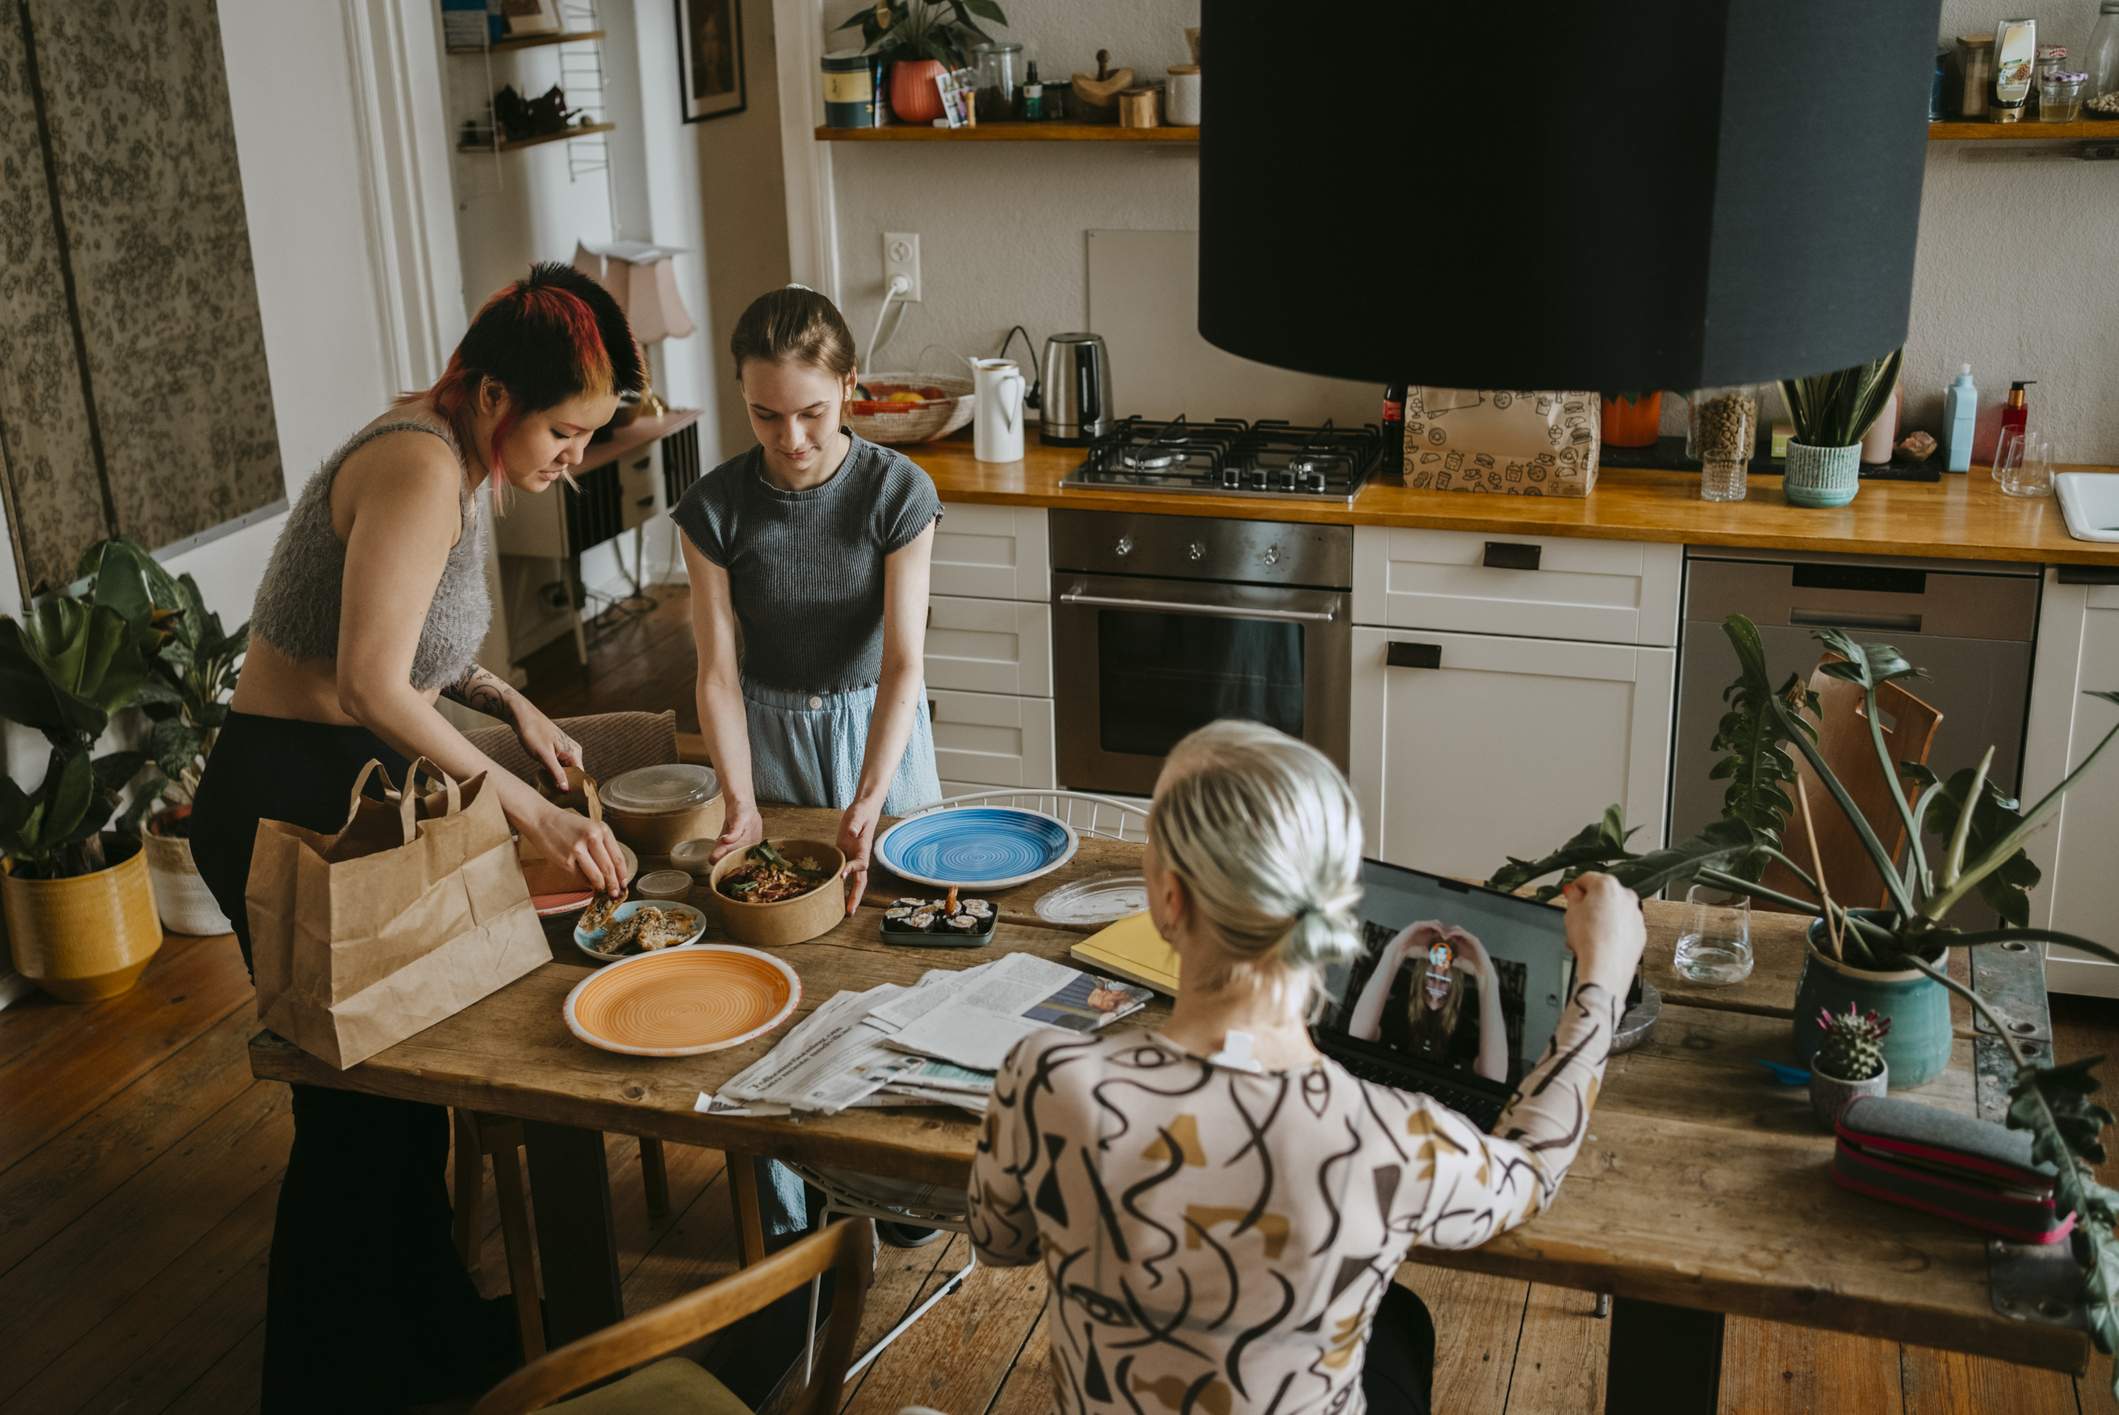 A group enjoys a restaurant meal in their home kitchen, thanks to a third-party delivery platform.